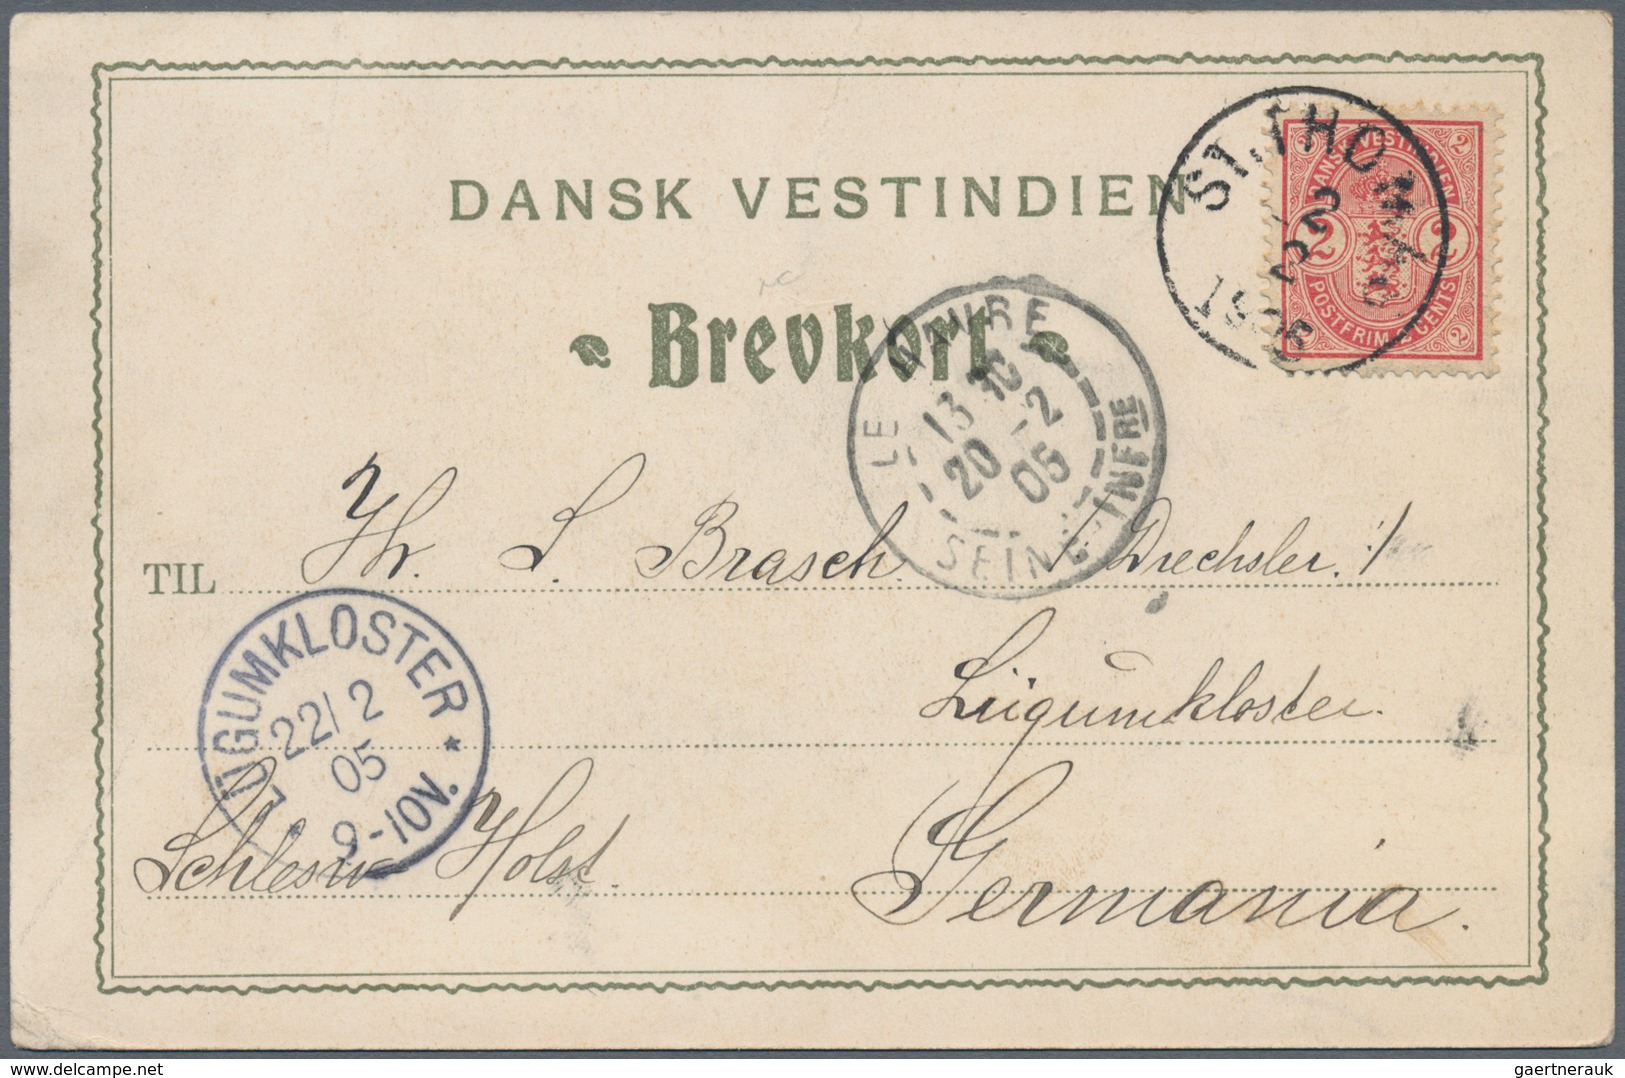 Dänisch-Westindien: 1905 Picture Postcard With View Of St. Thomas (Barrack For Military Use) Franked - Denmark (West Indies)